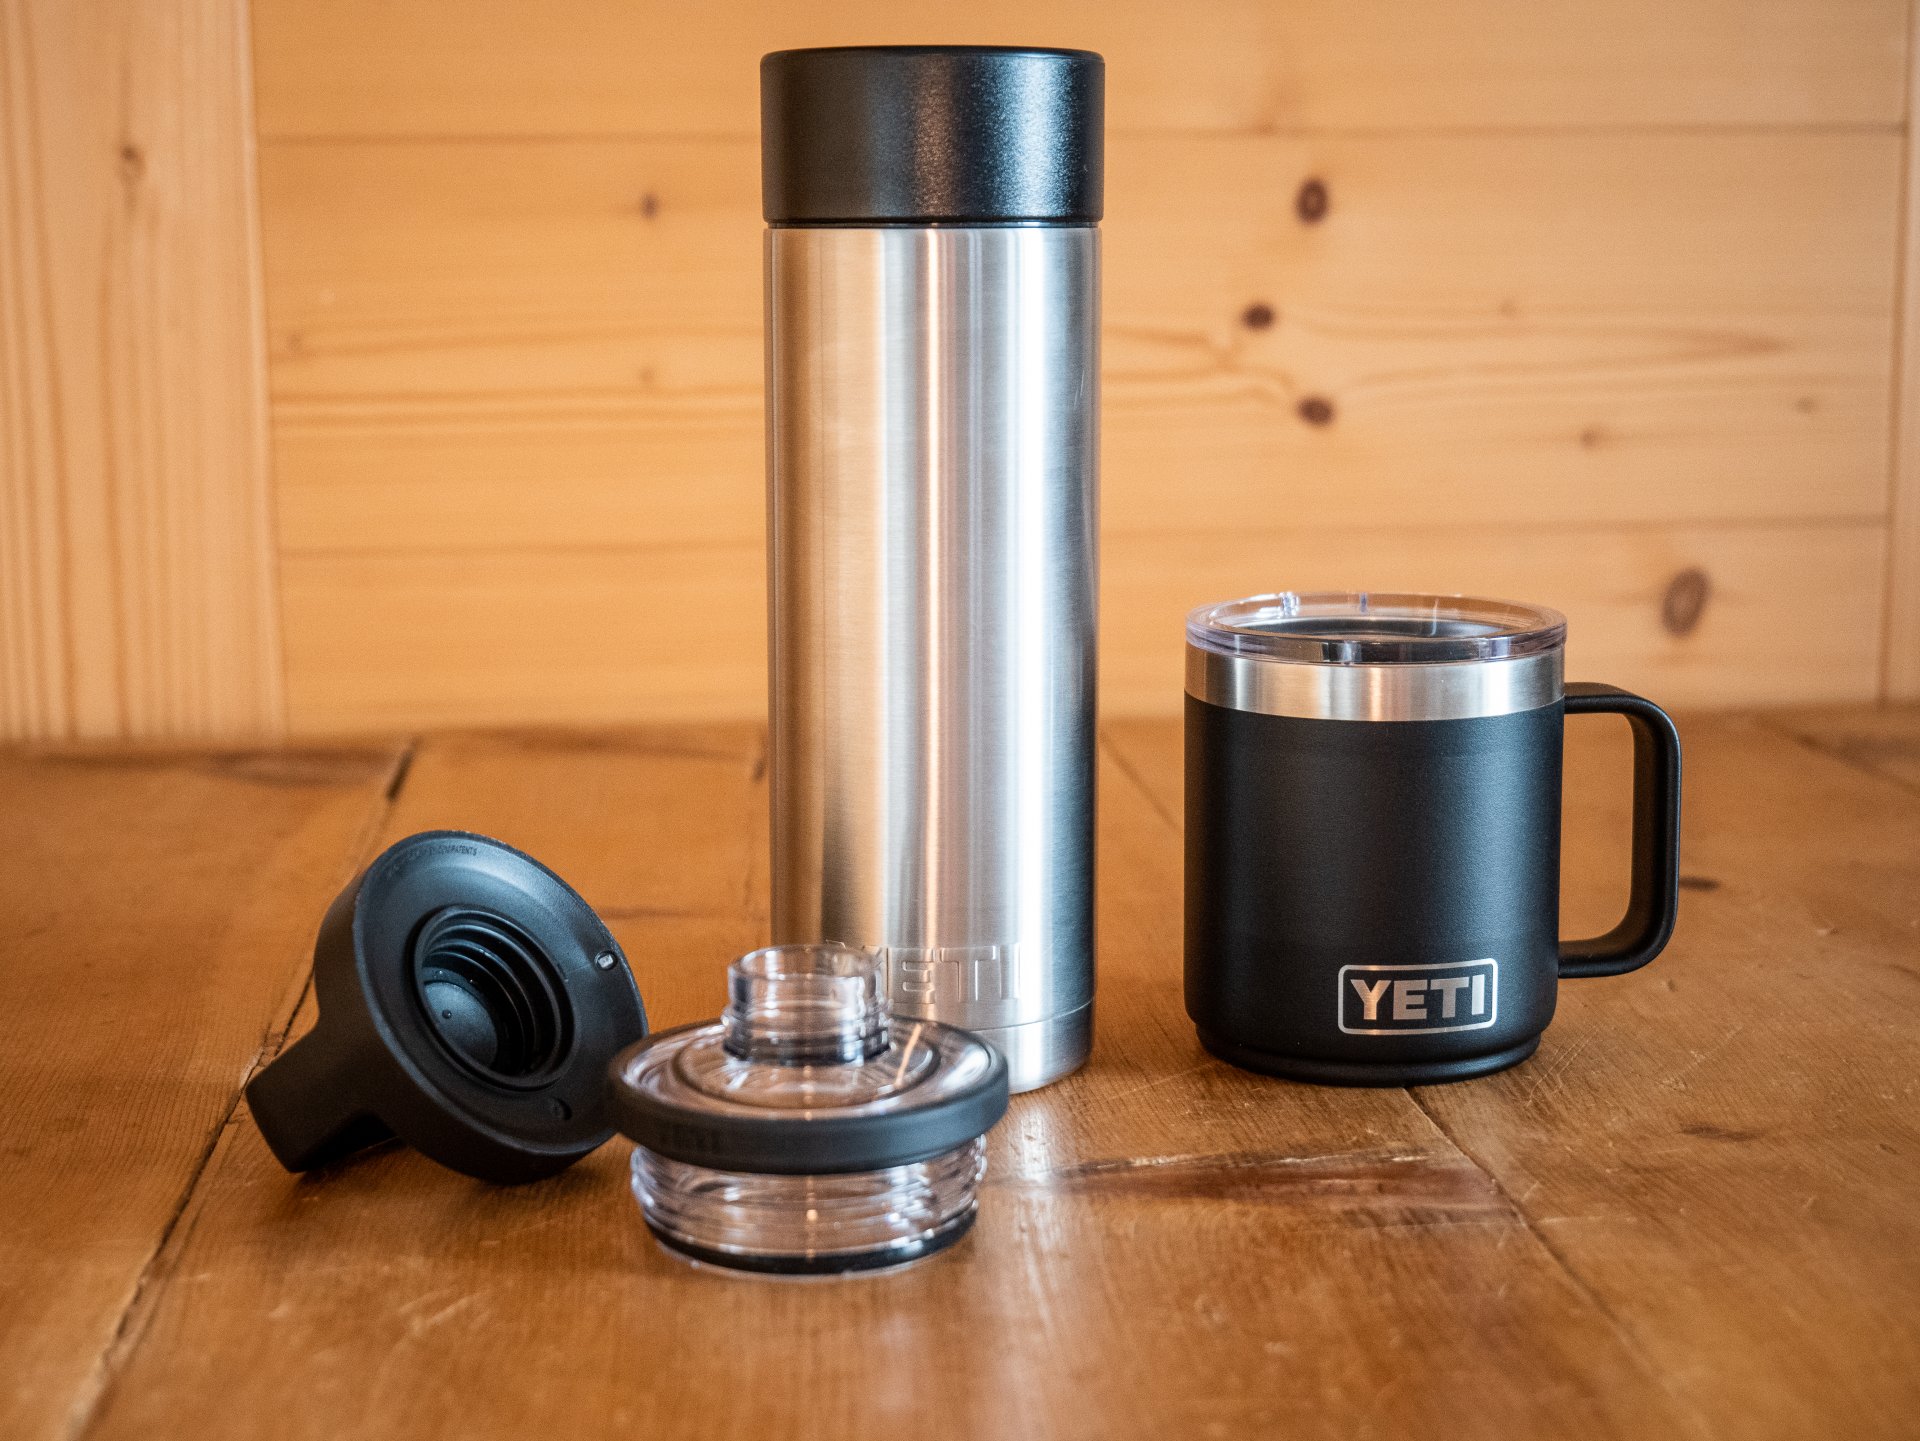 Yeti Cycles Water Bottle - Accessories